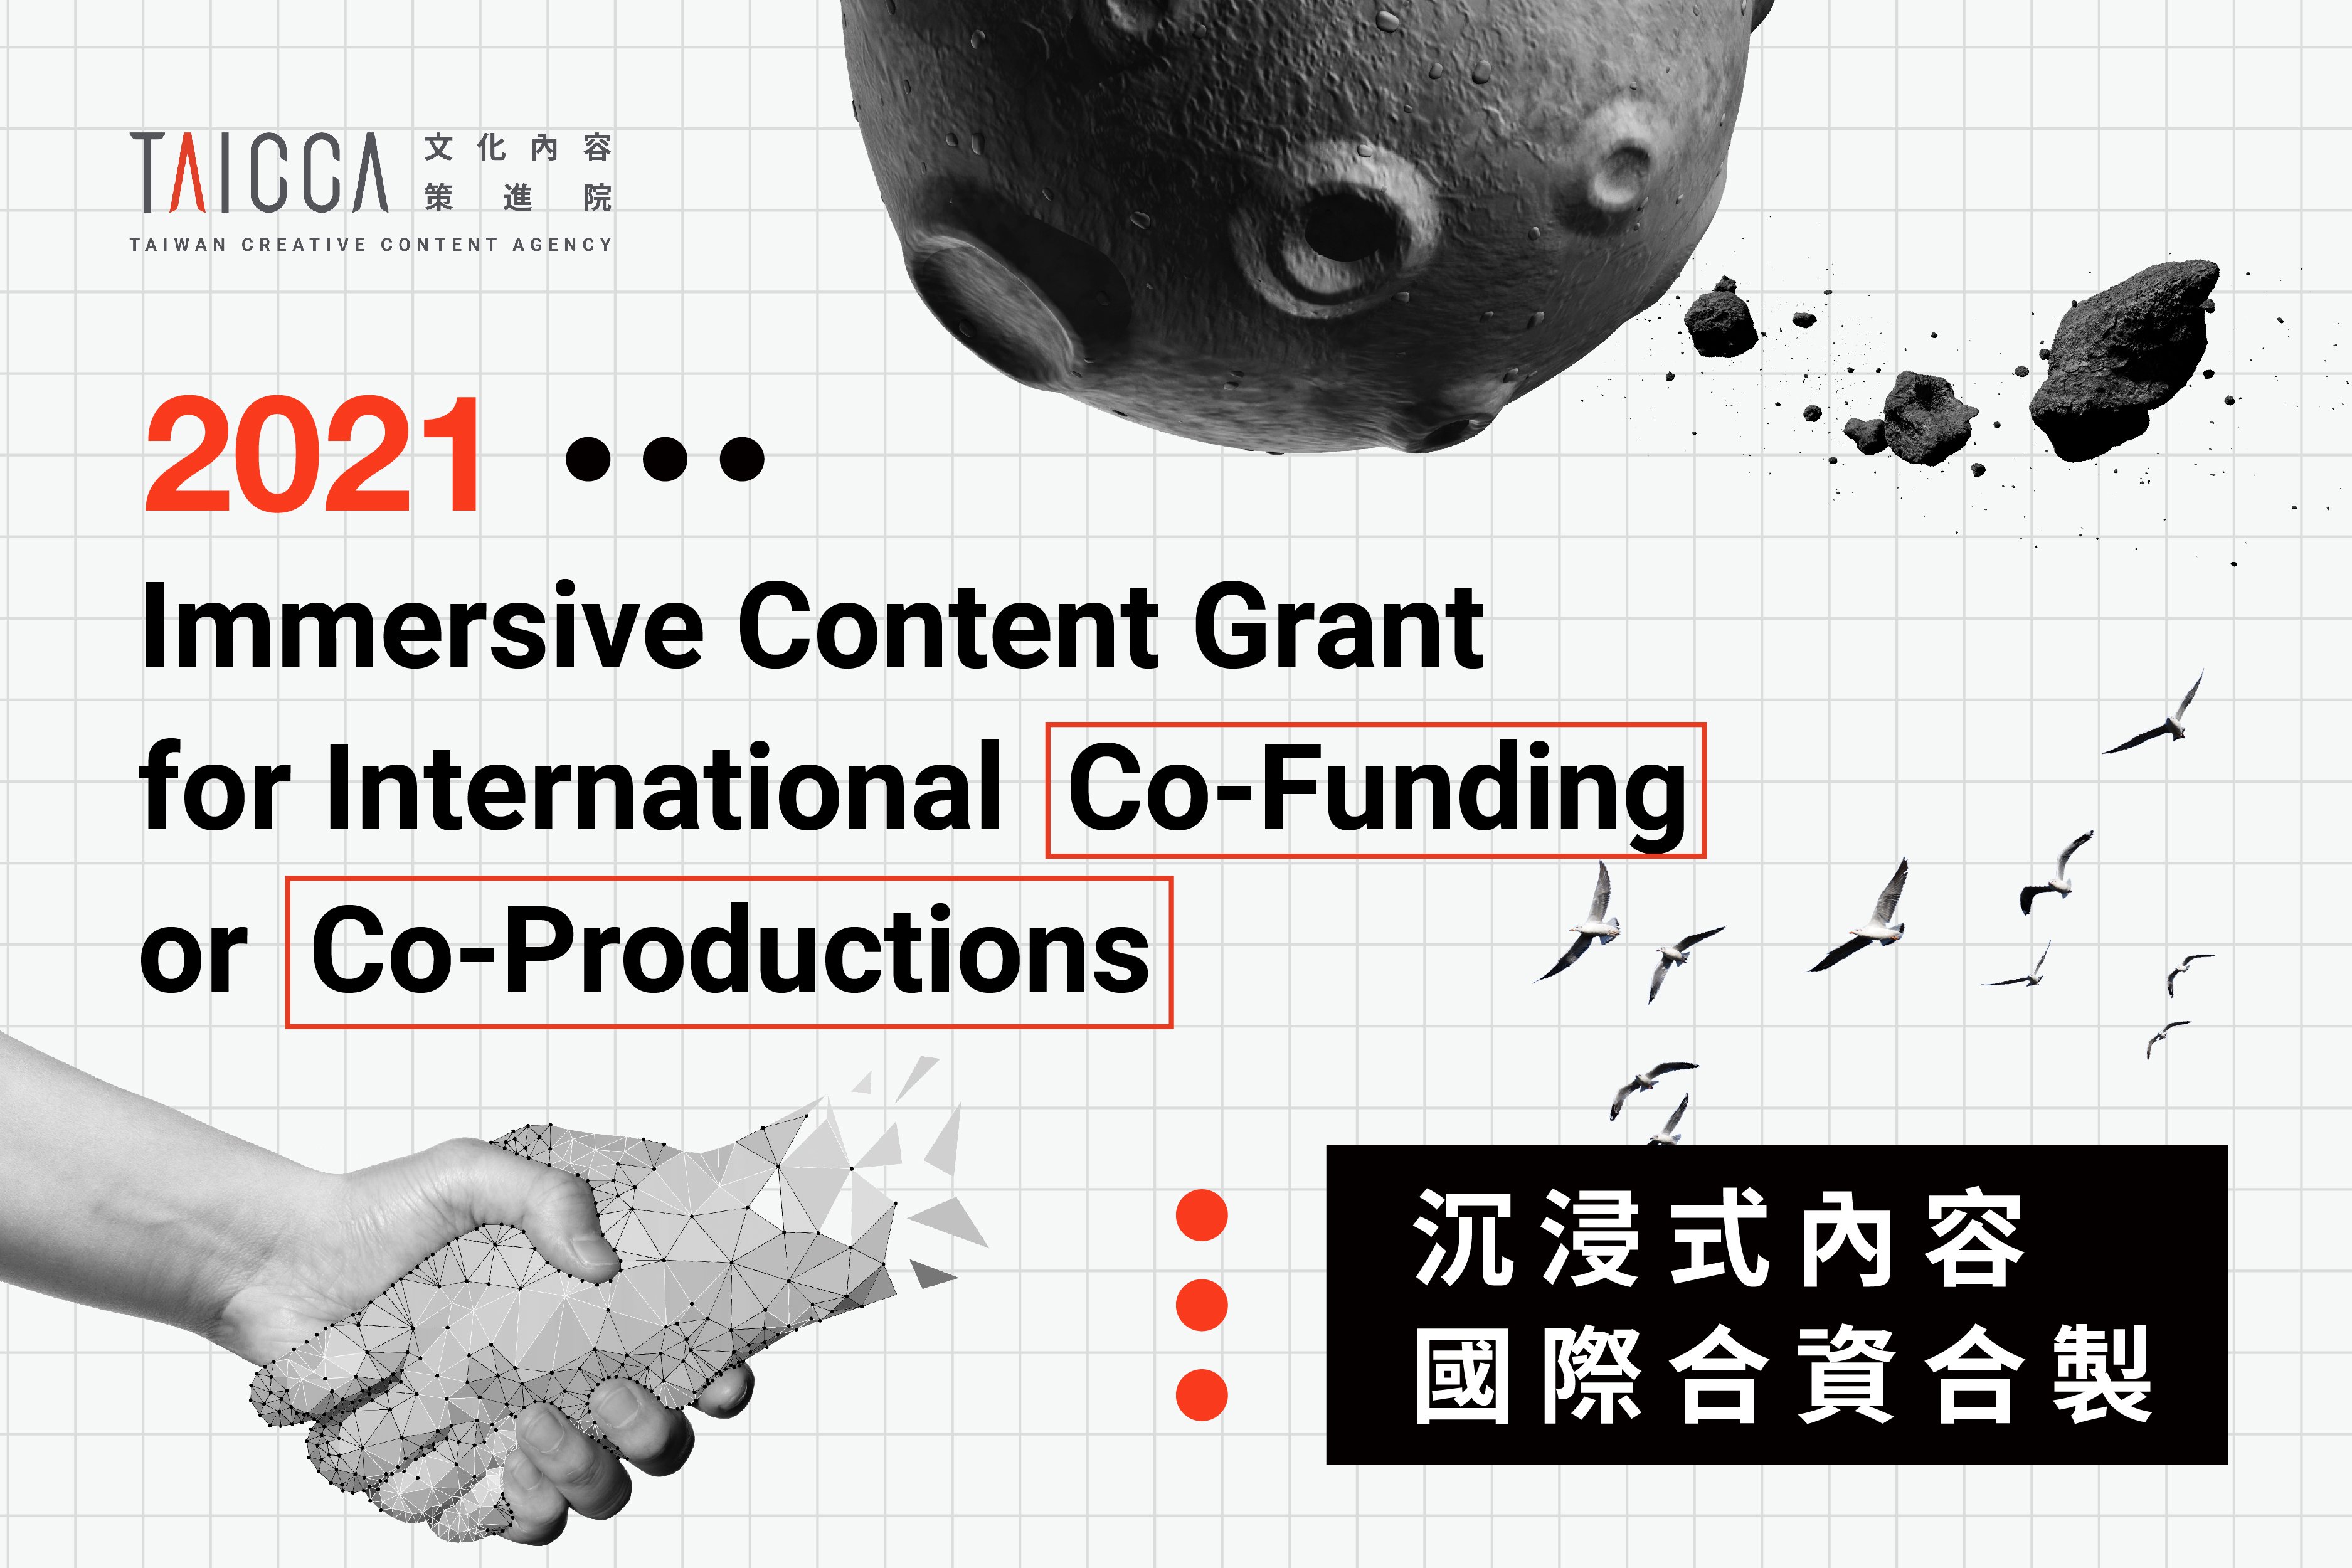 Announcement of 2021 TAICCA Immersive Content Grant Selected Projects